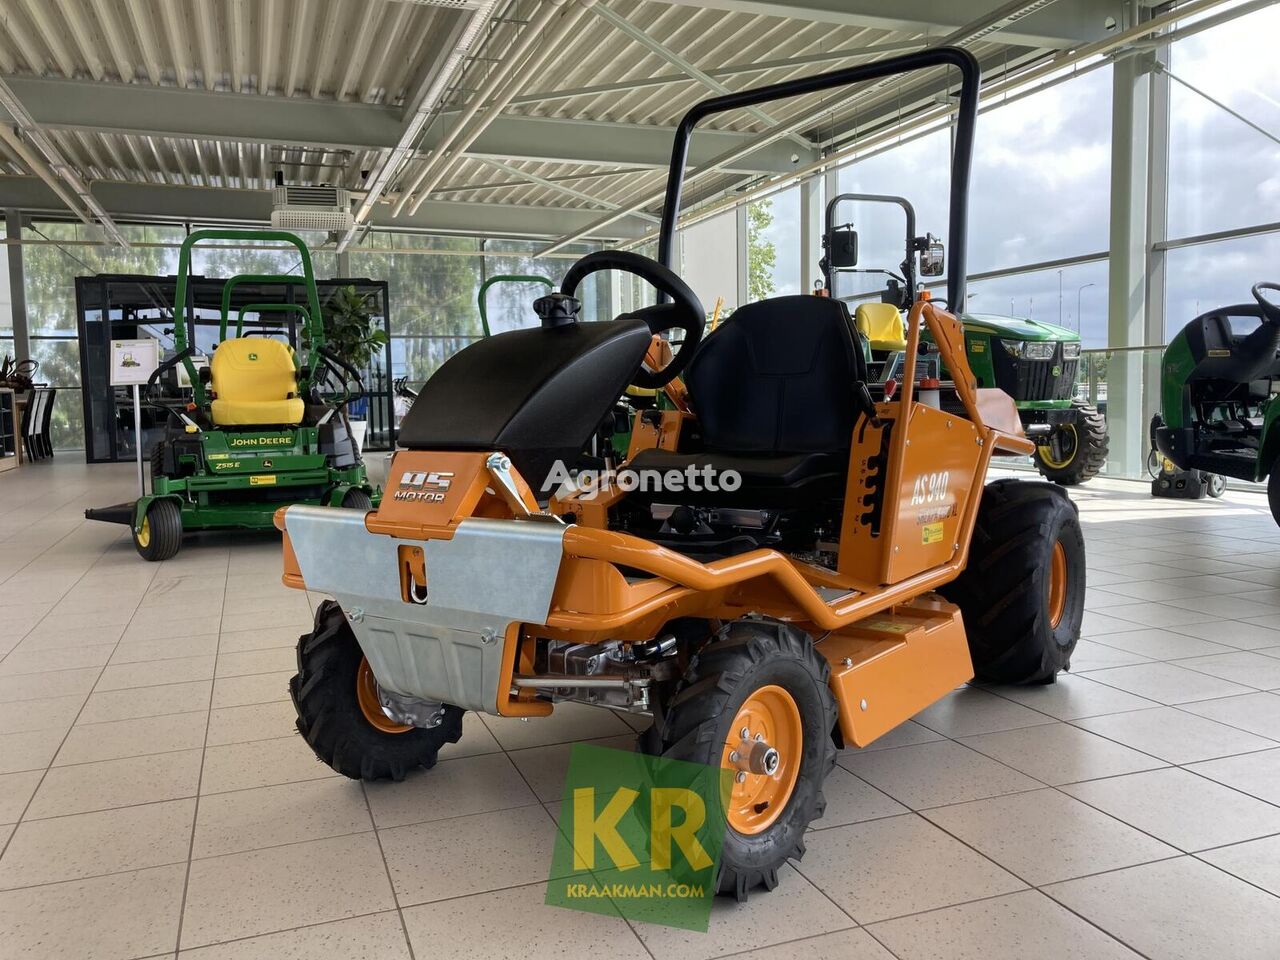 AS 940 Sherpa 4WD XL tractor cortacésped nuevo